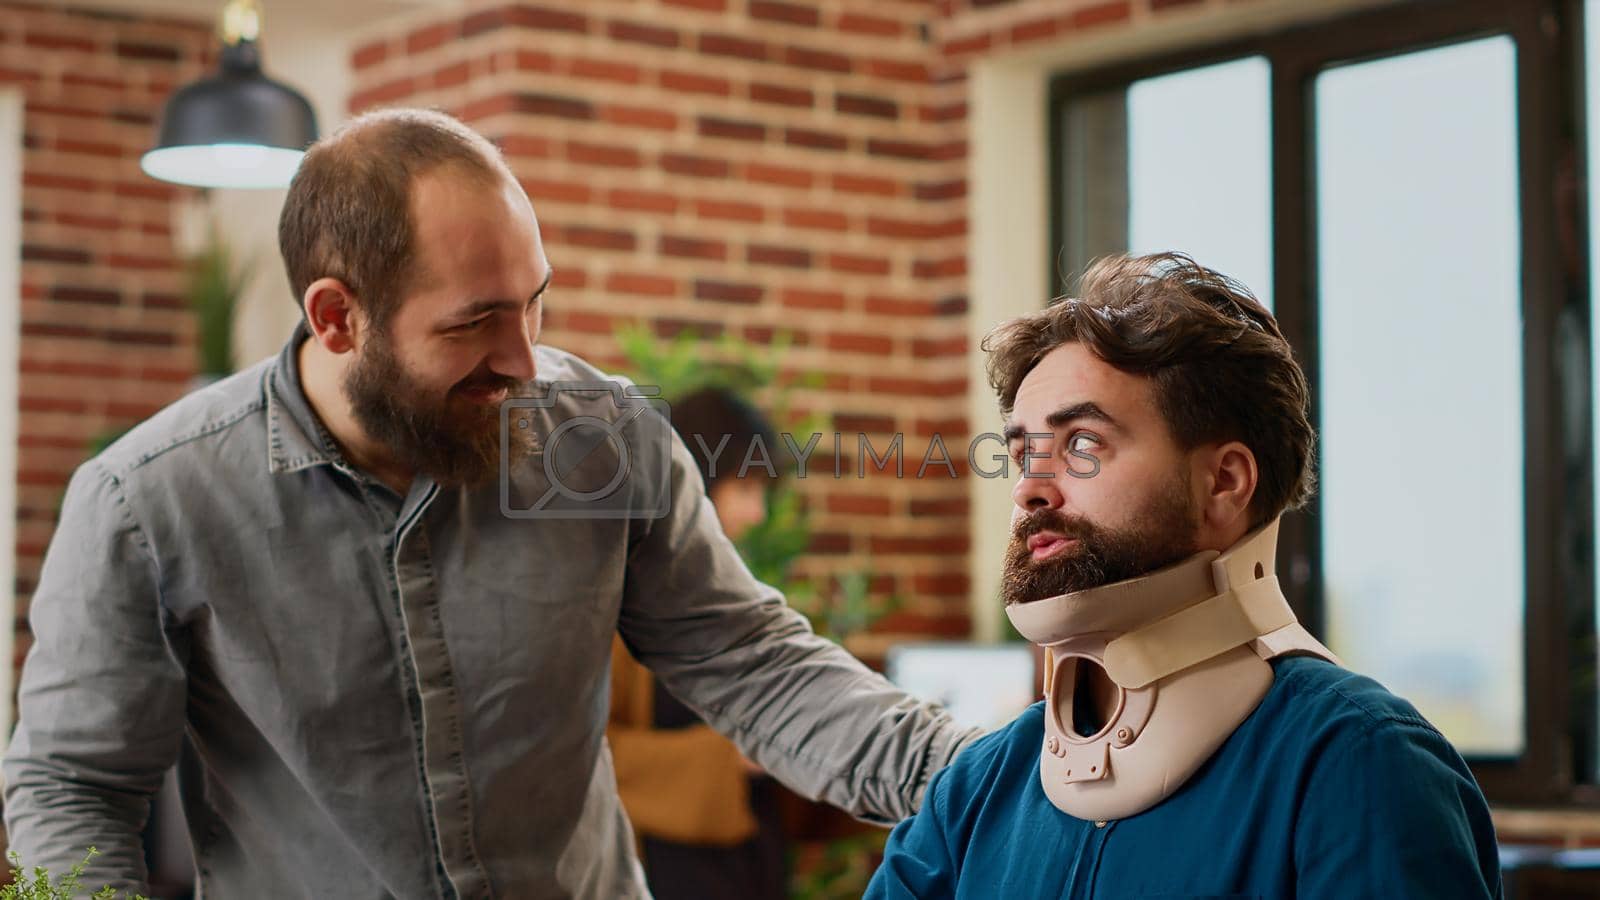 Royalty free image of Office employee with neck collar brace working after accident injury by DCStudio